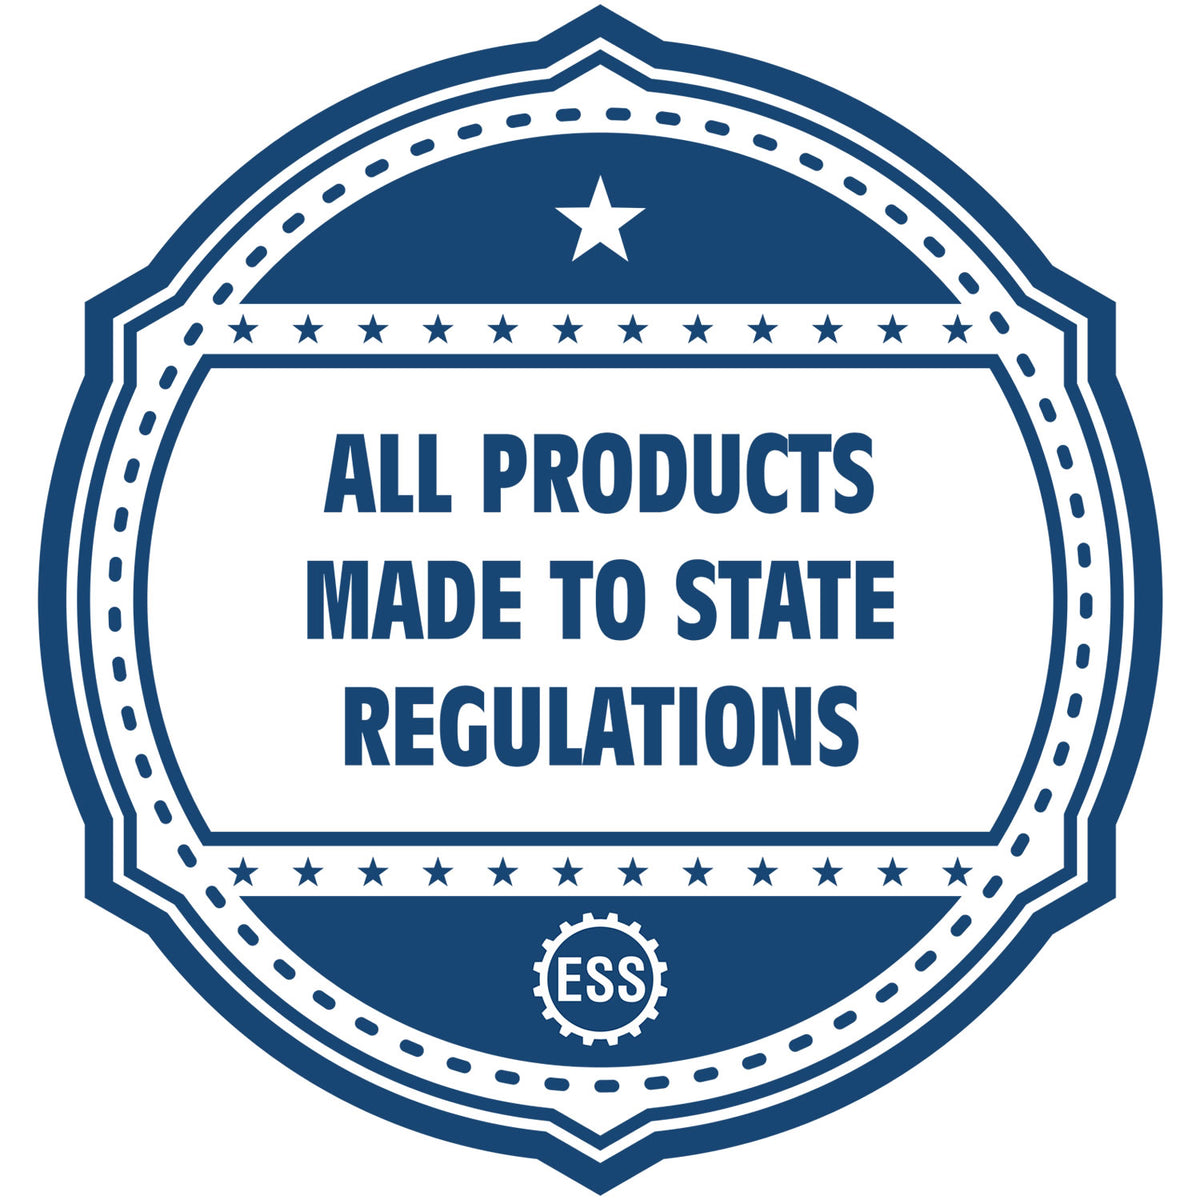 An icon or badge element for the Slim Pre-Inked Rectangular Notary Stamp for Arkansas showing that this product is made in compliance with state regulations.